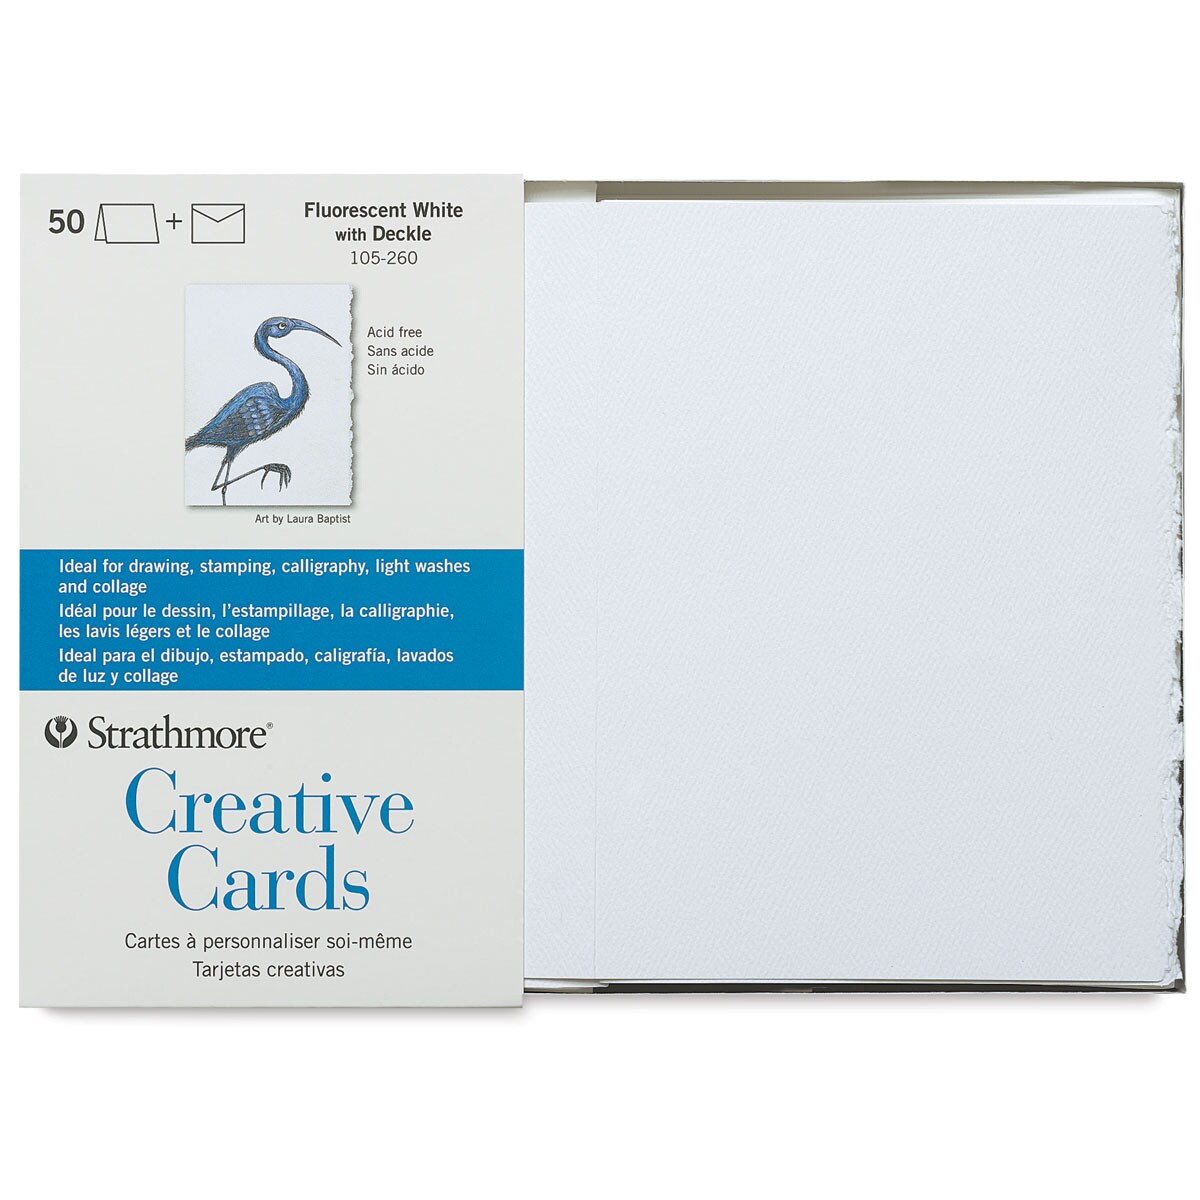 Strathmore Creative Cards and Envelopes - Full Size, Fluorescent White with Deckle, Pkg of 50